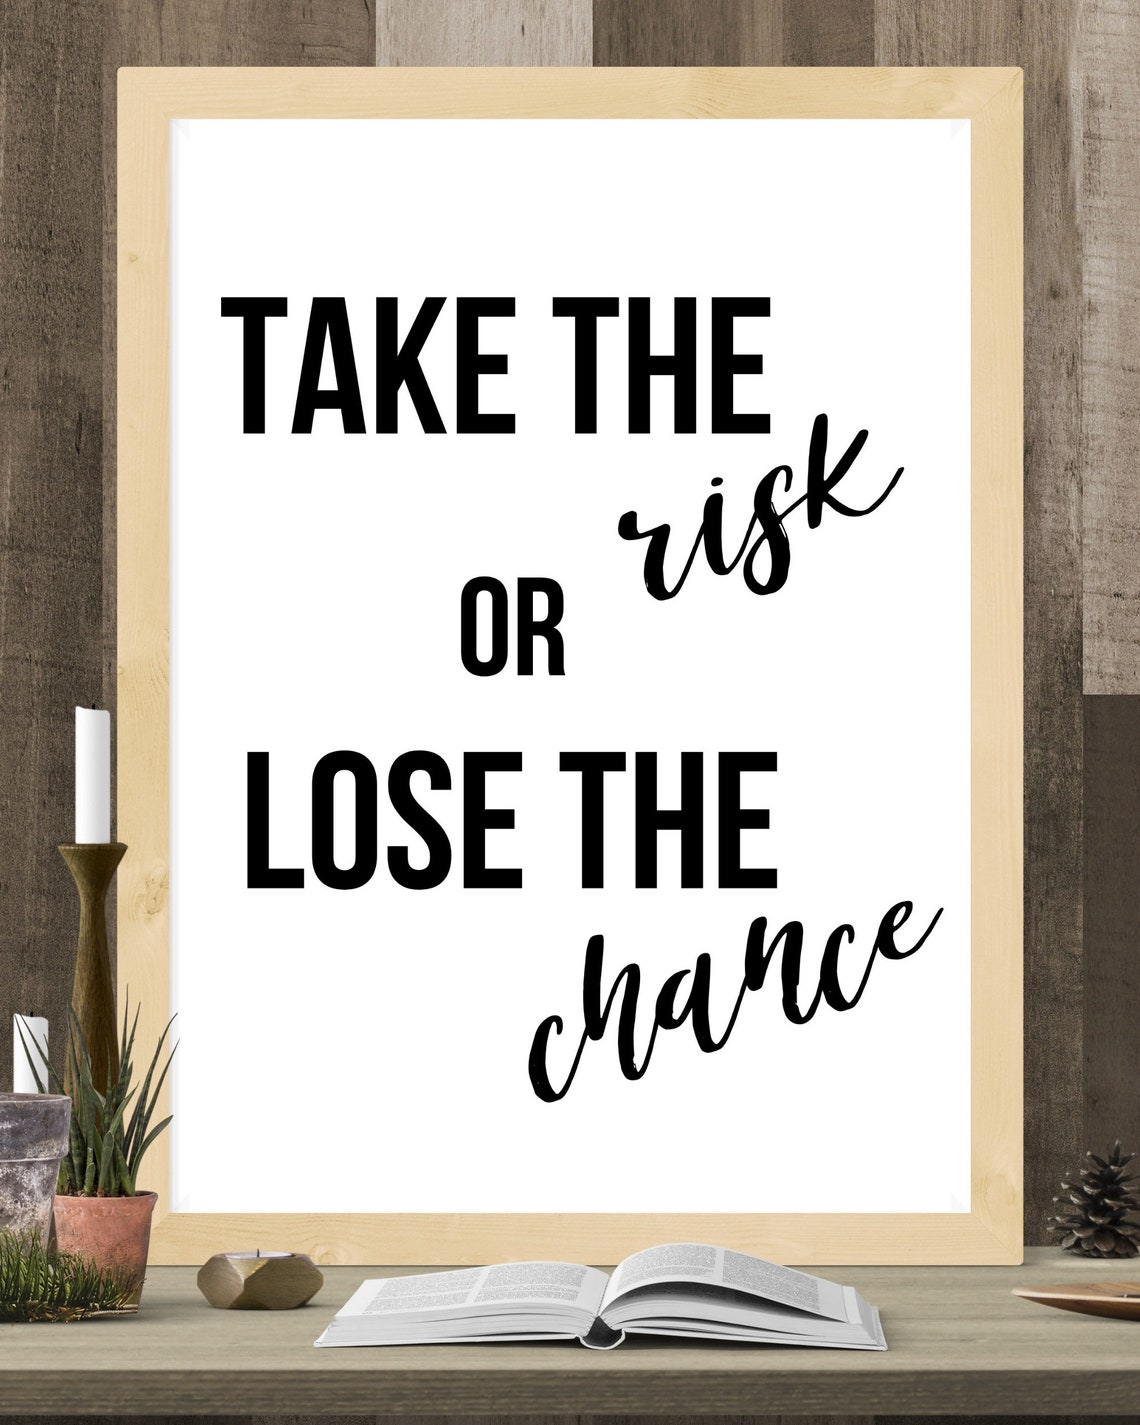 Take The Risk or Lose The Chance Motivational Wall Art // | Etsy